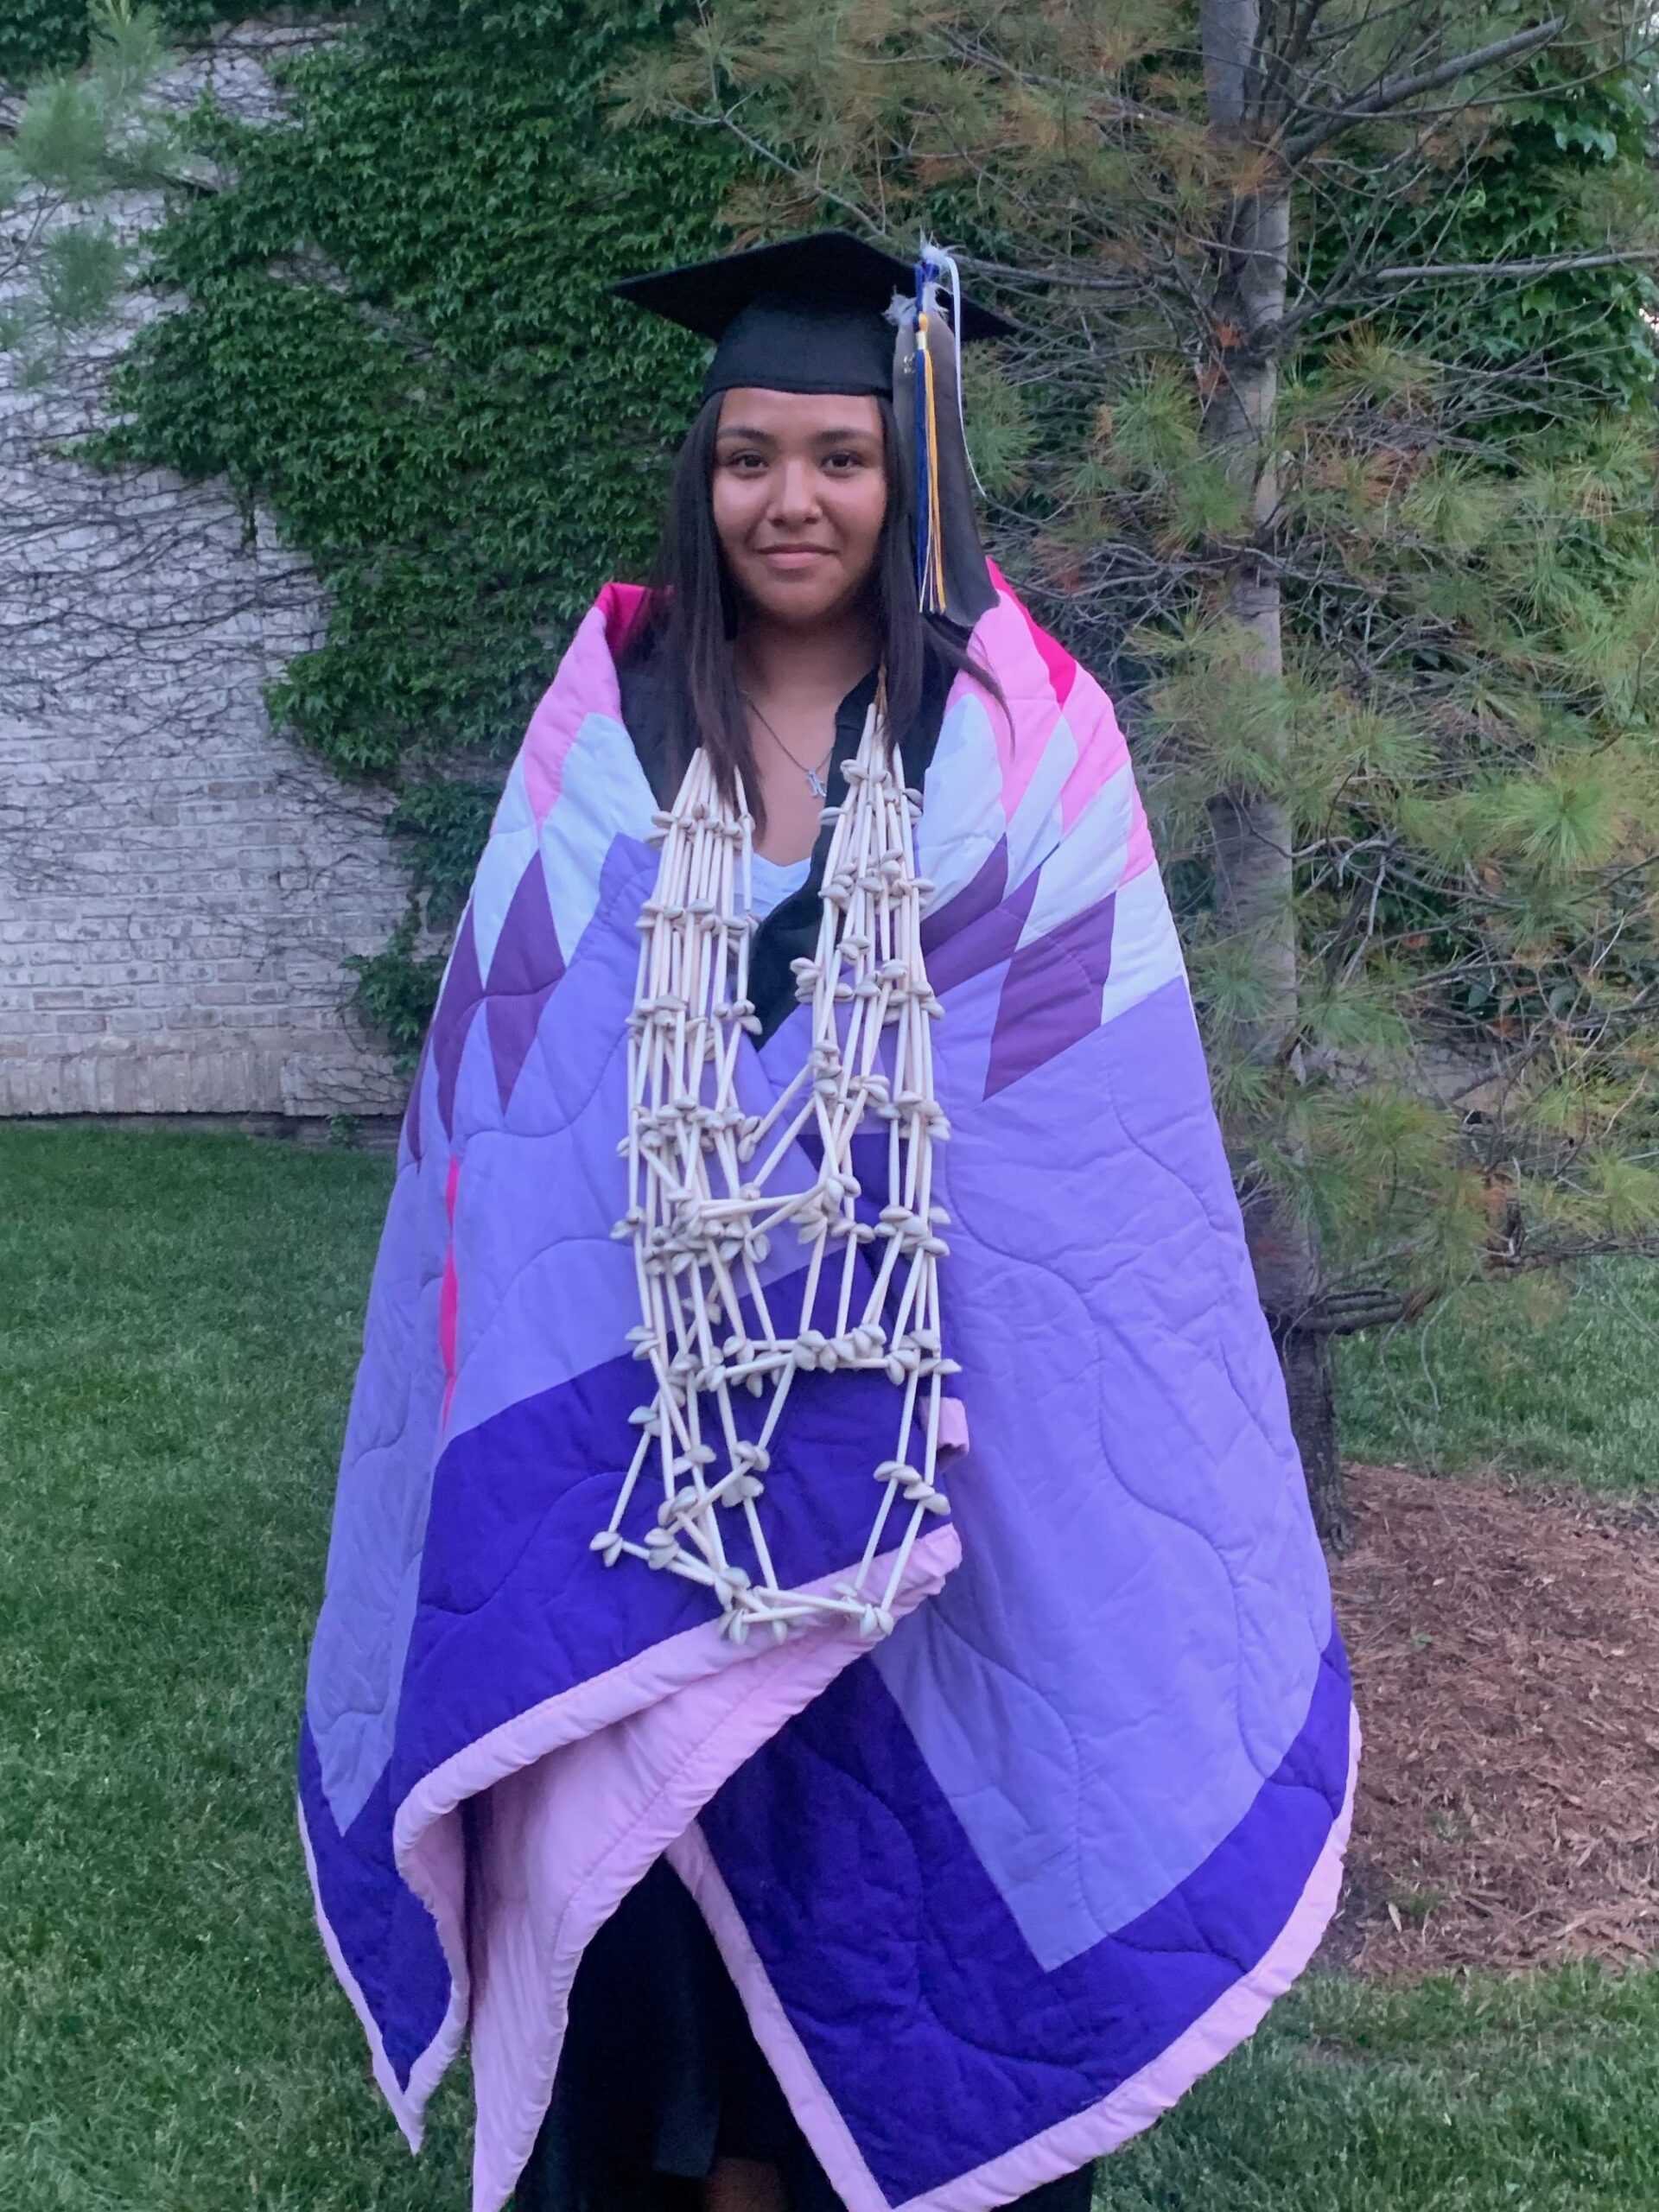 Keya Luta Win Hunt poses in a star quilt at her high school graduation. The quilt was created by a member of the Lower Sioux community.